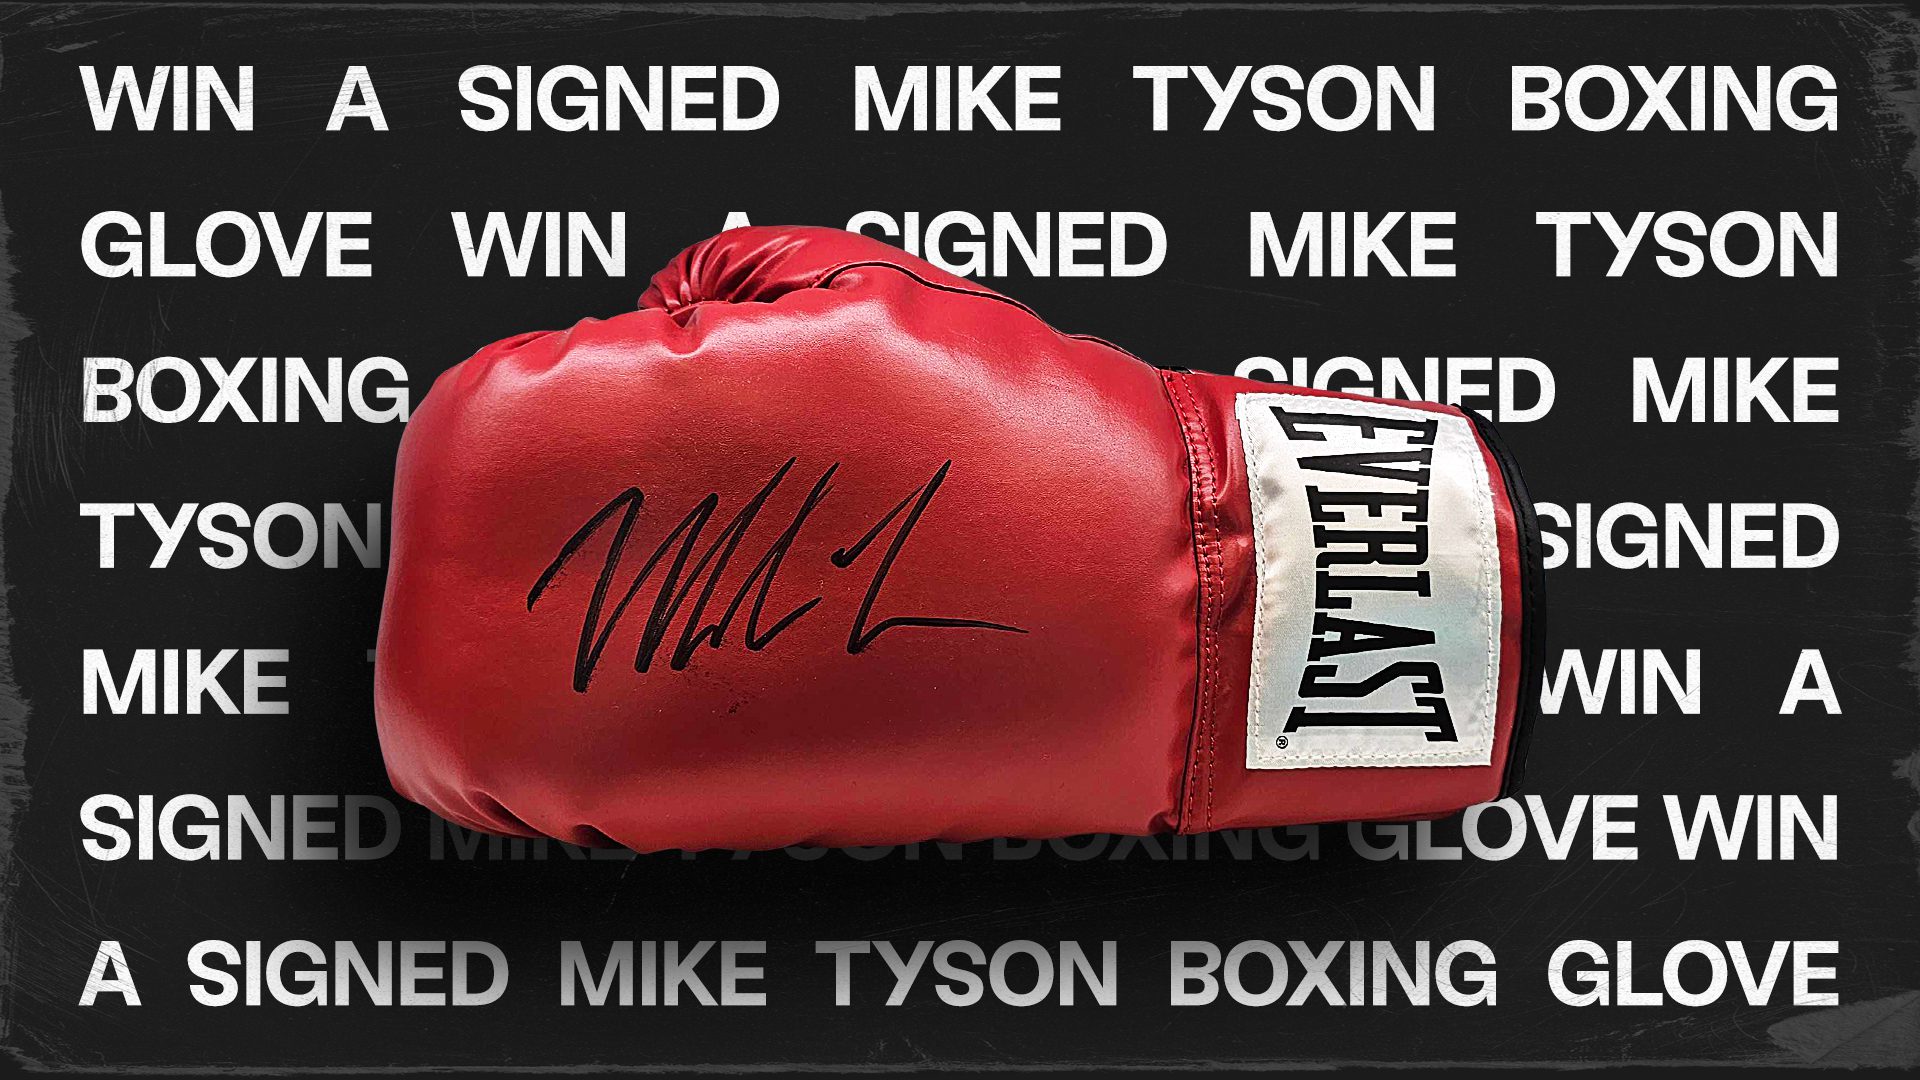 Win a Signed Mike Tyson Boxing Glove